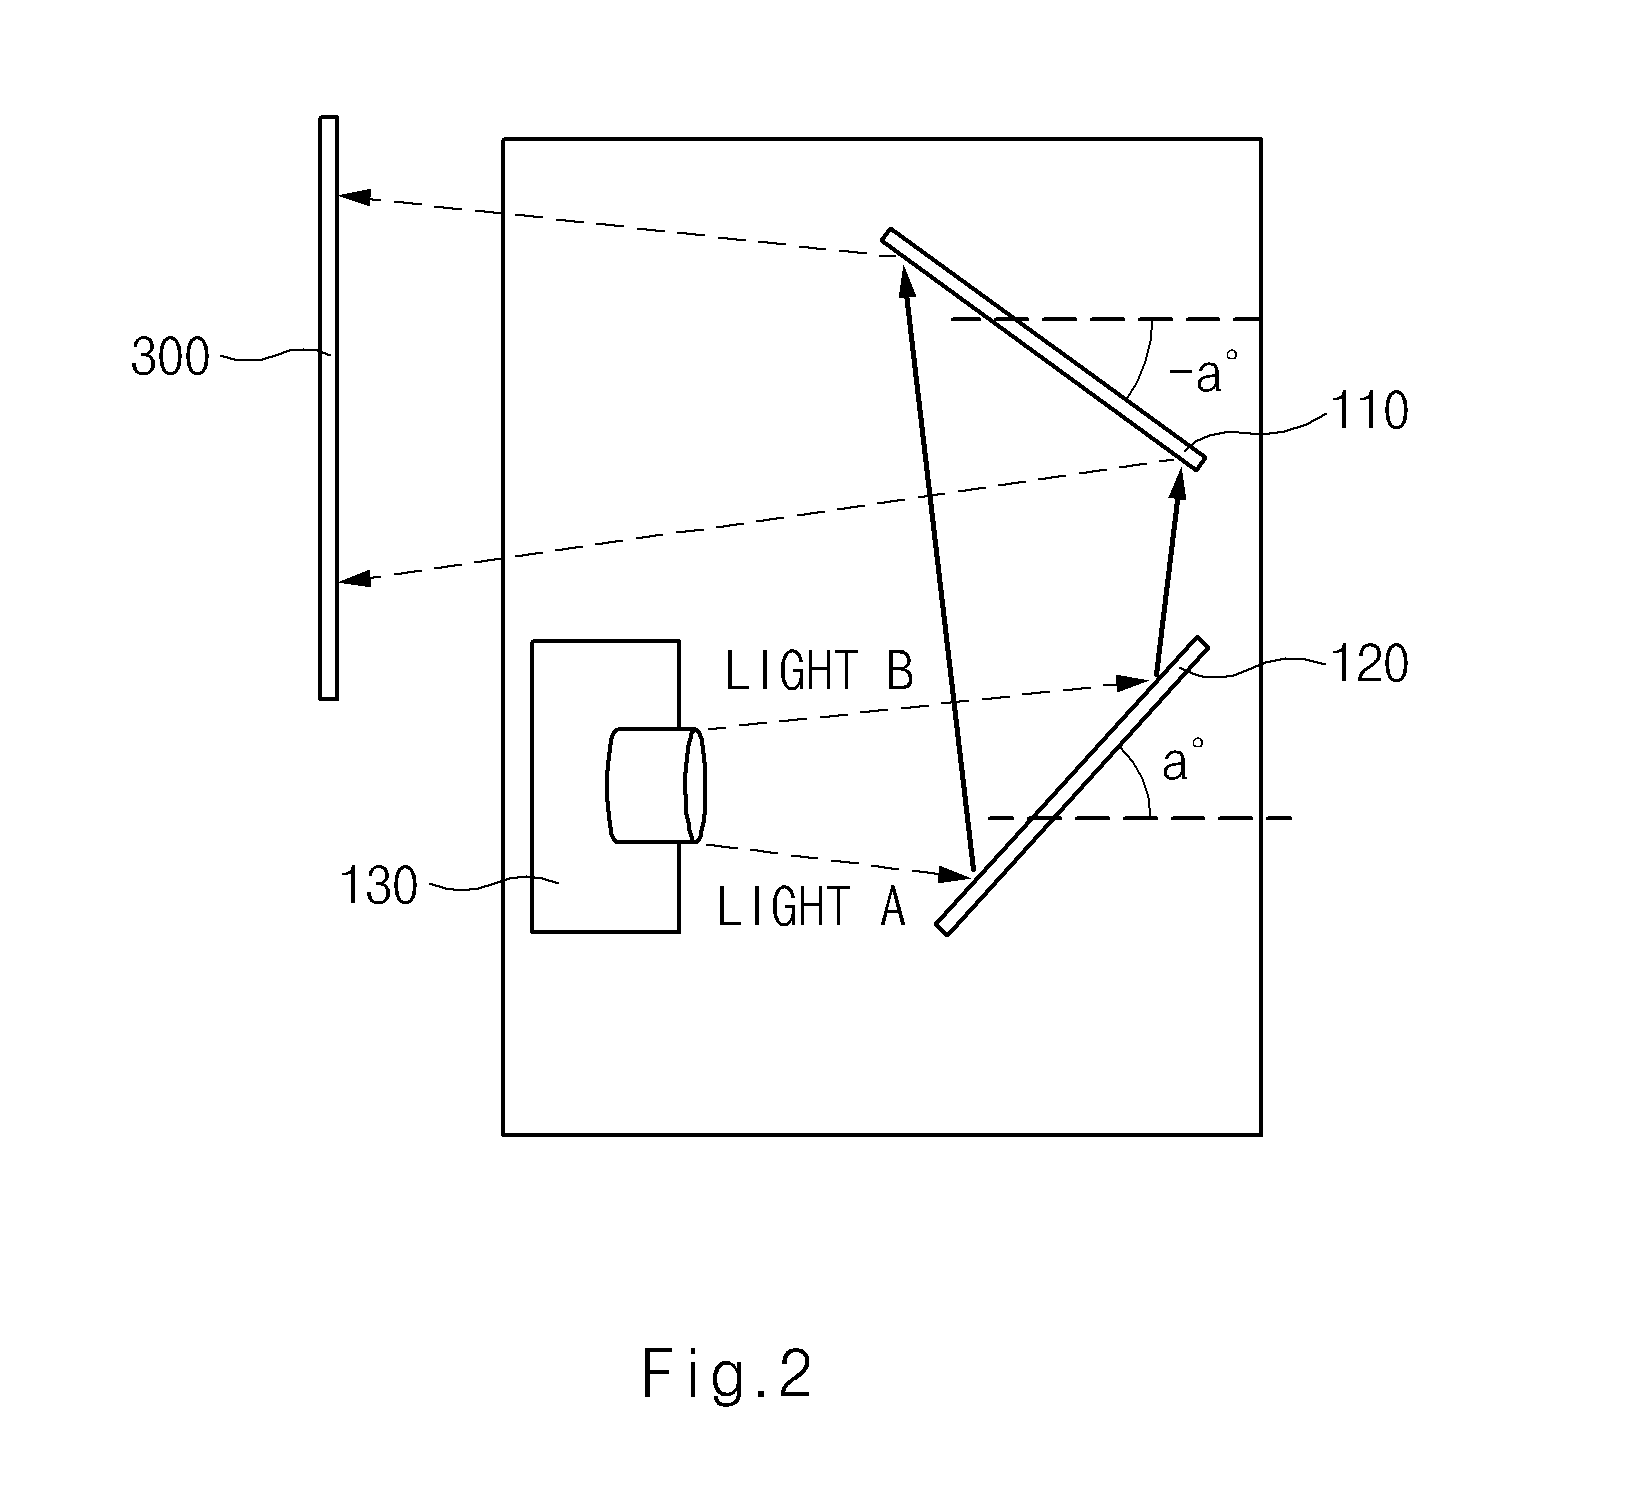 Vehicle instrument panel with rear projection system